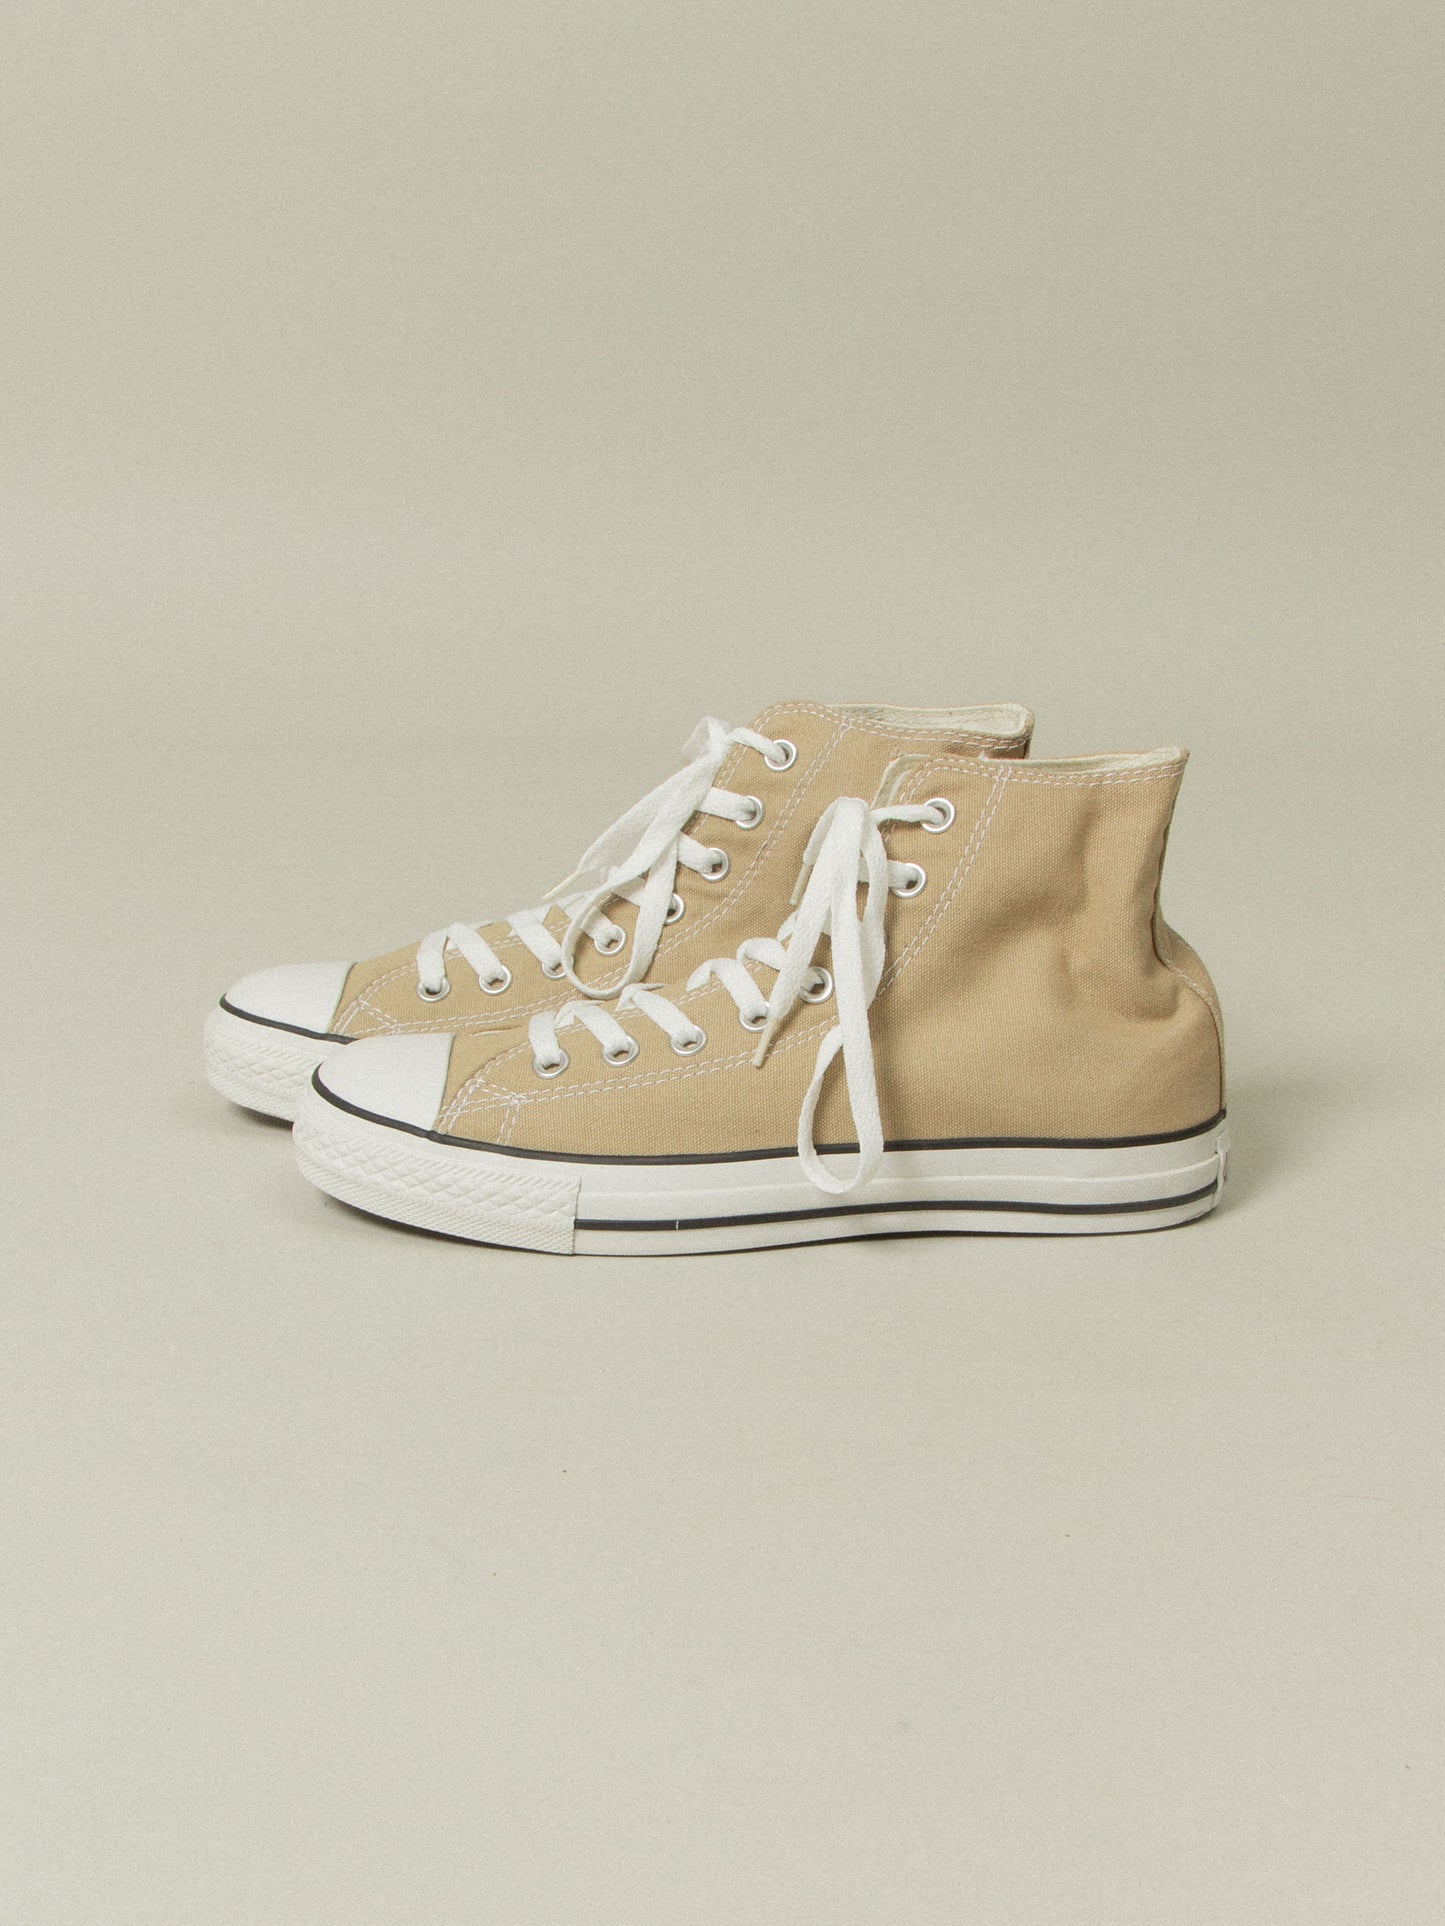 NOS Early 2000s Converse All Star - Taupe